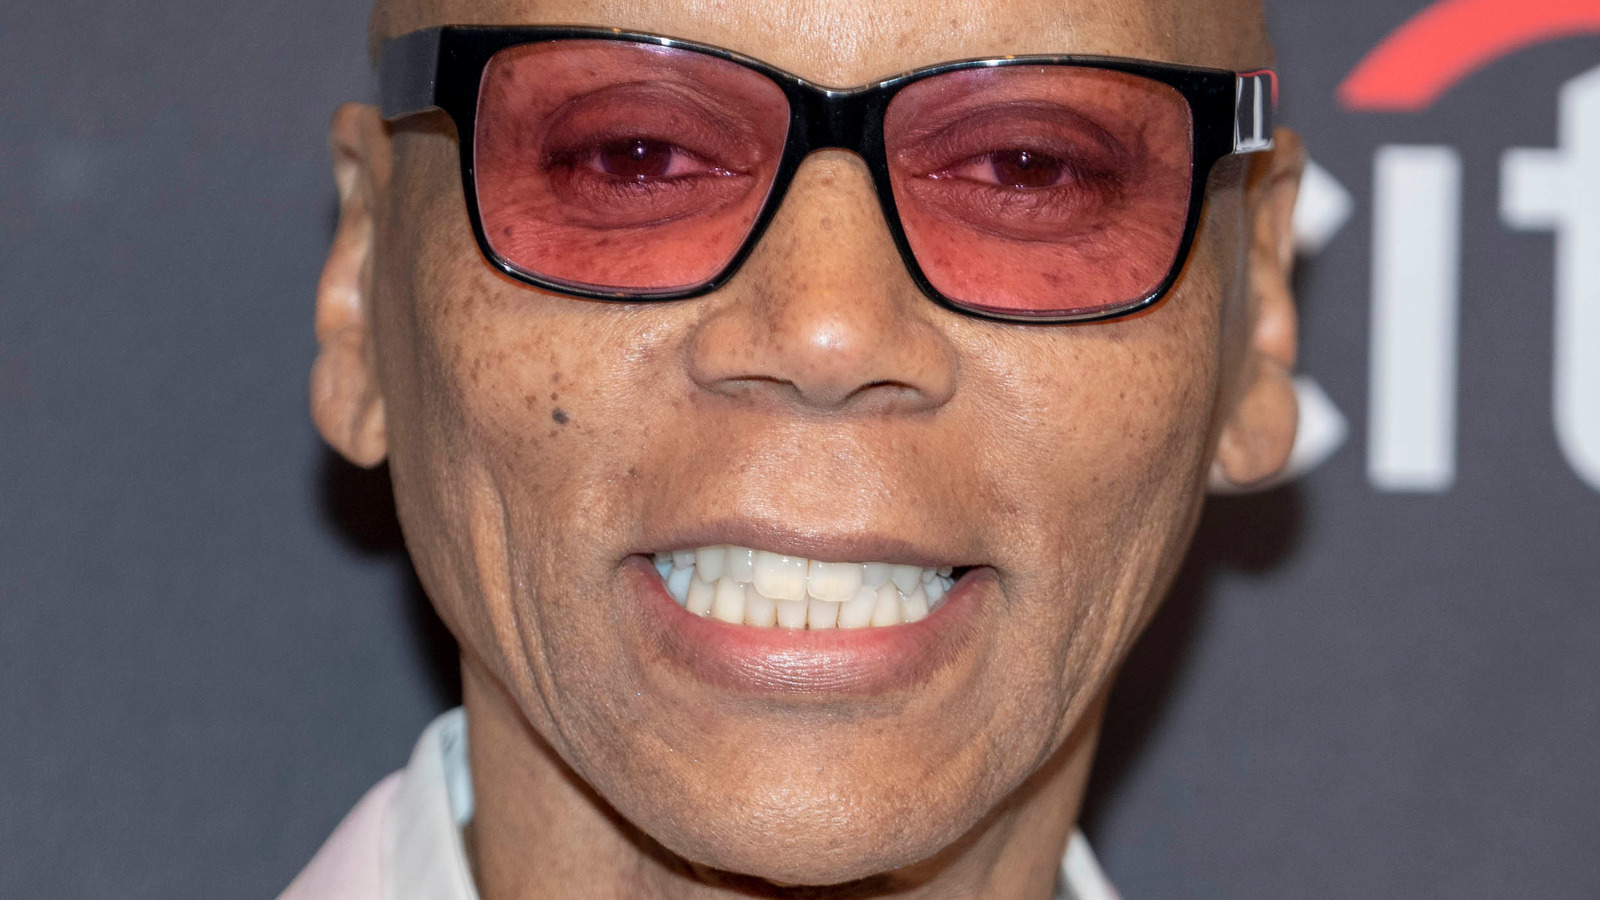 How Much Does RuPaul Make Per Episode Of RuPaul’s Drag Race?